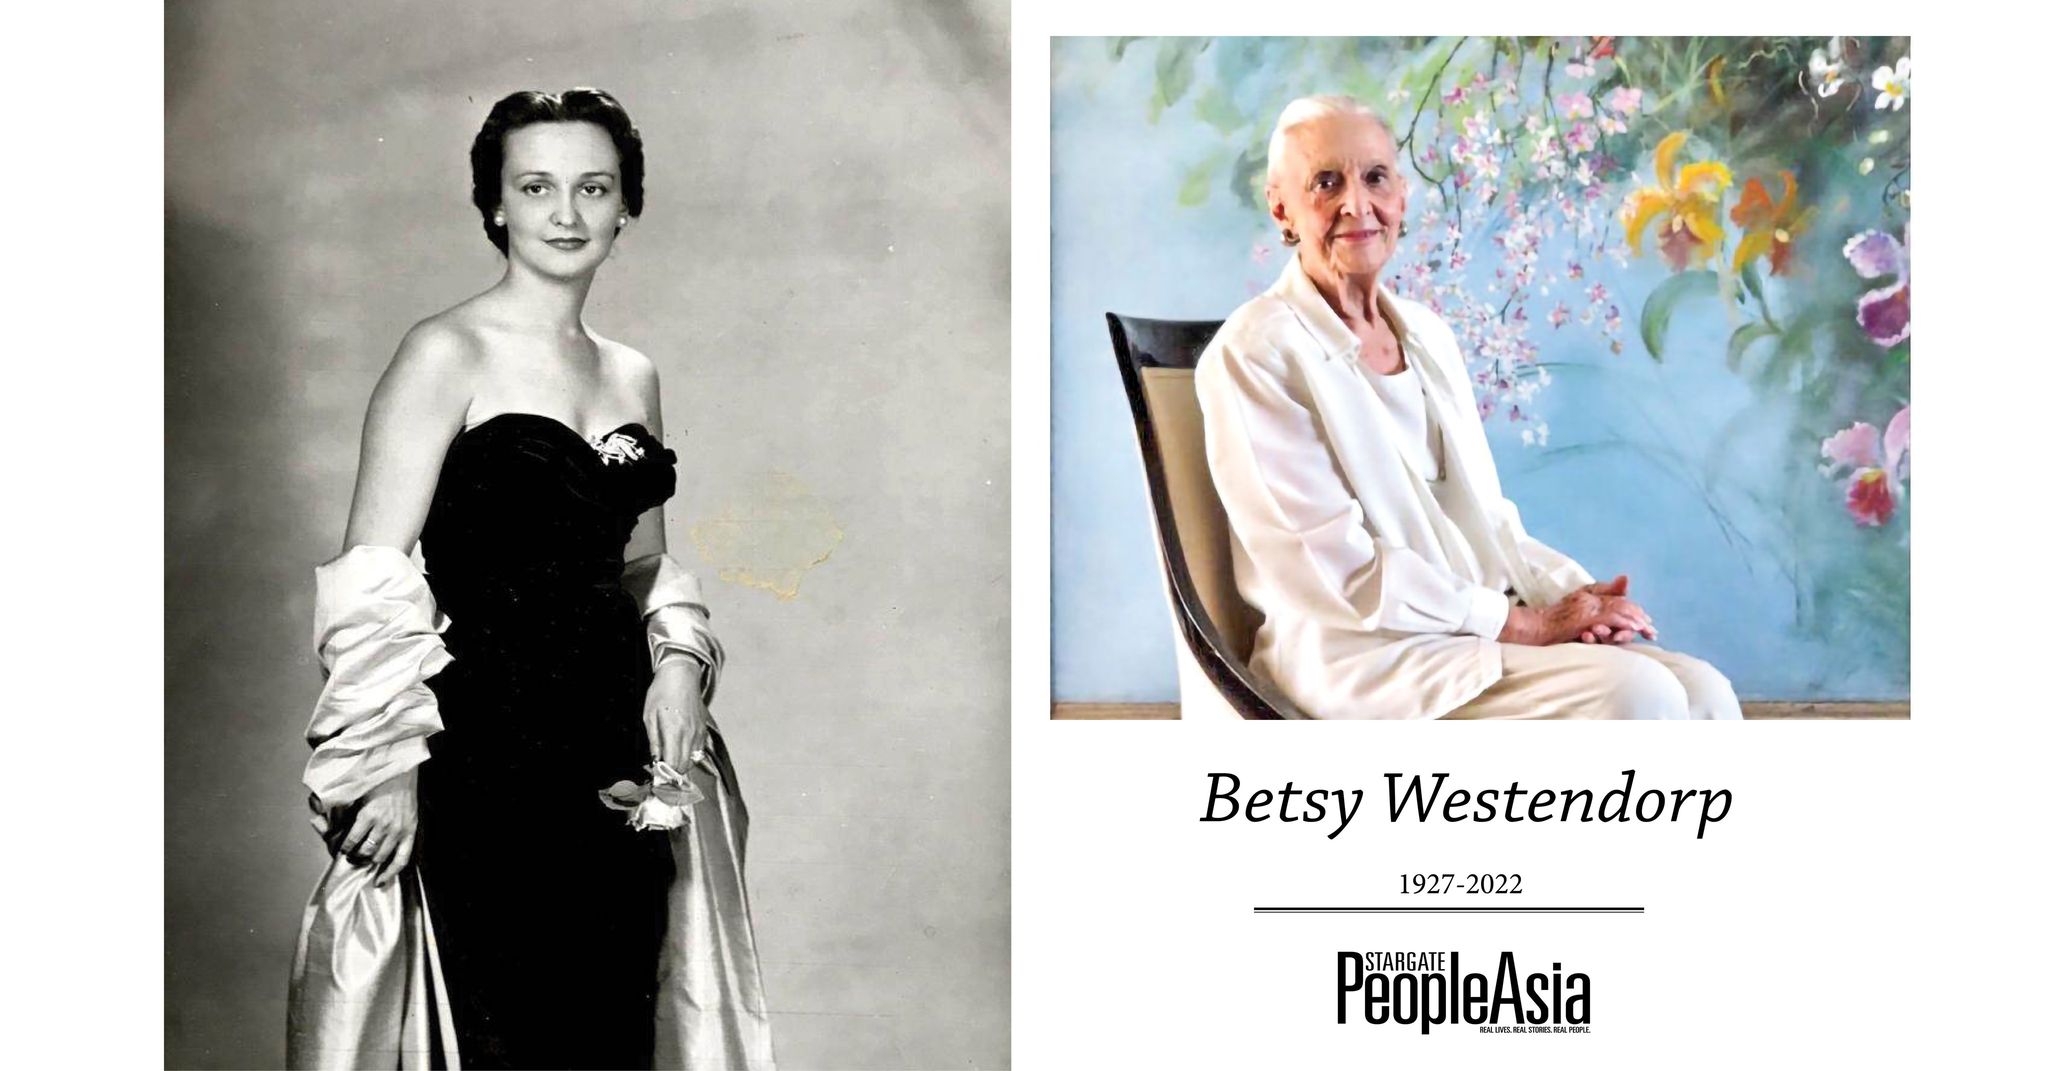 Reverie in color: Remembering artist Betsy Westendorp